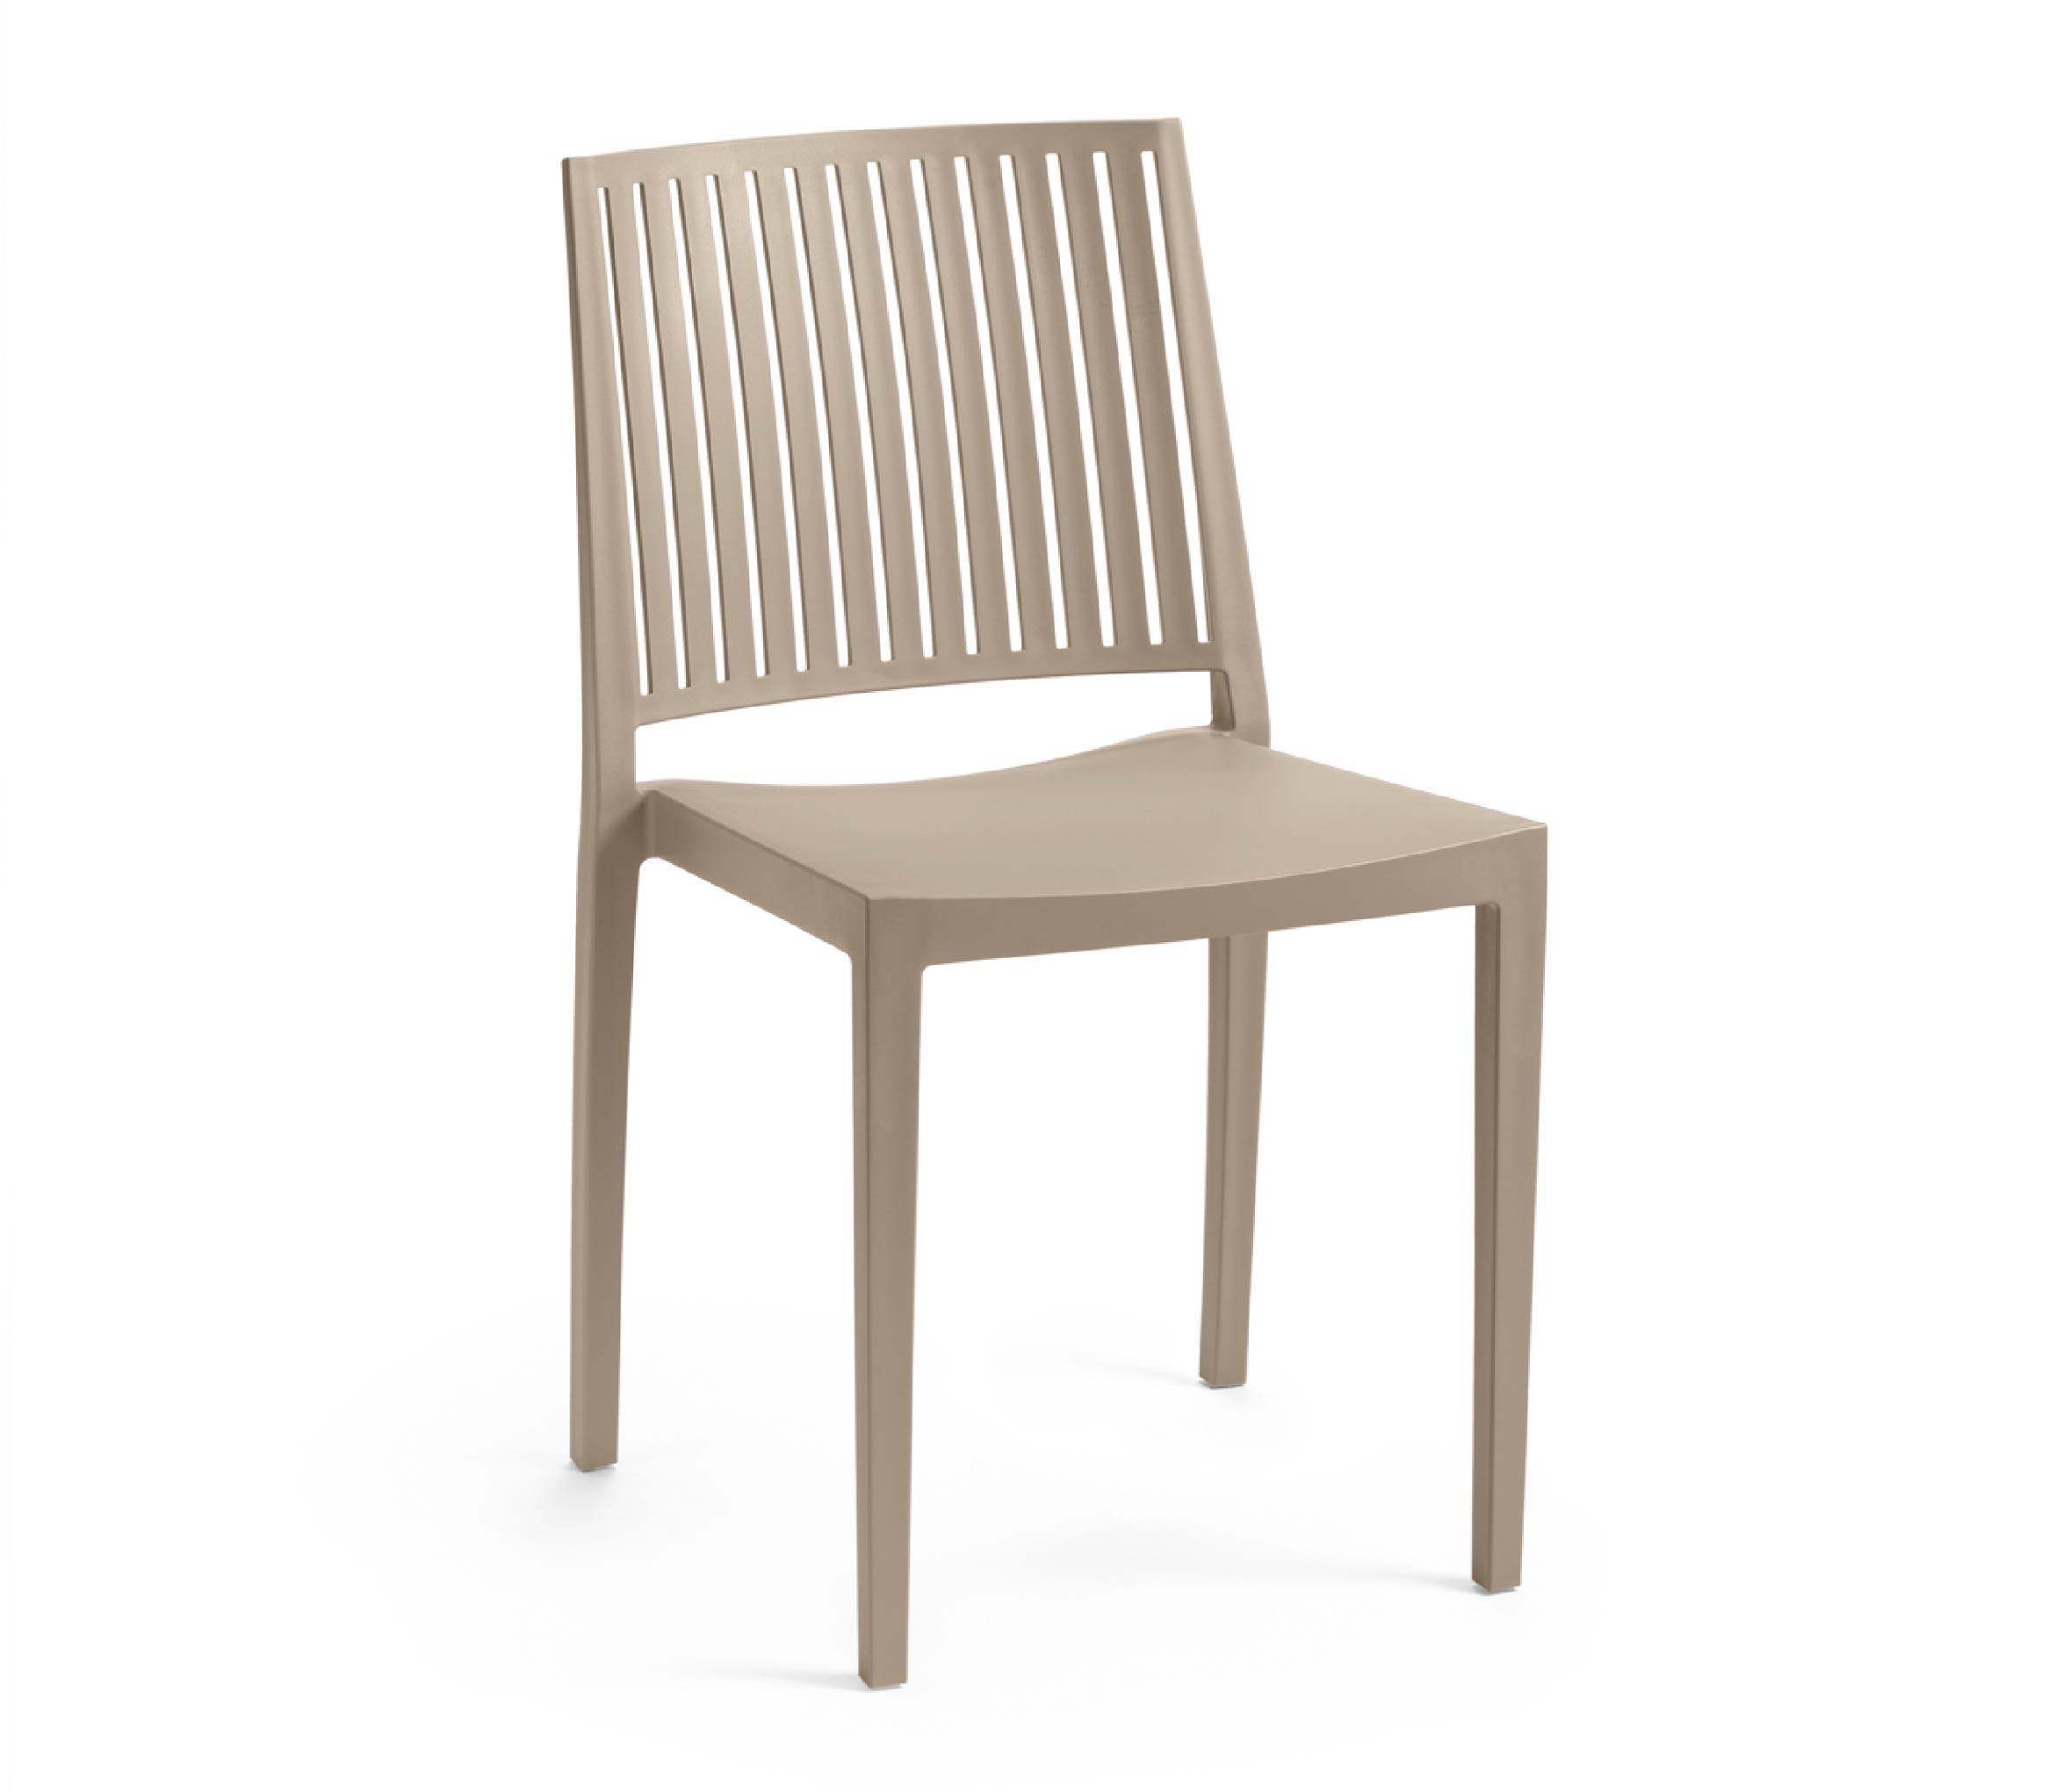 5 - TENSAI_FURNITURE_BARS_PLASTIC_taupe_chair_color_white_background_802_001